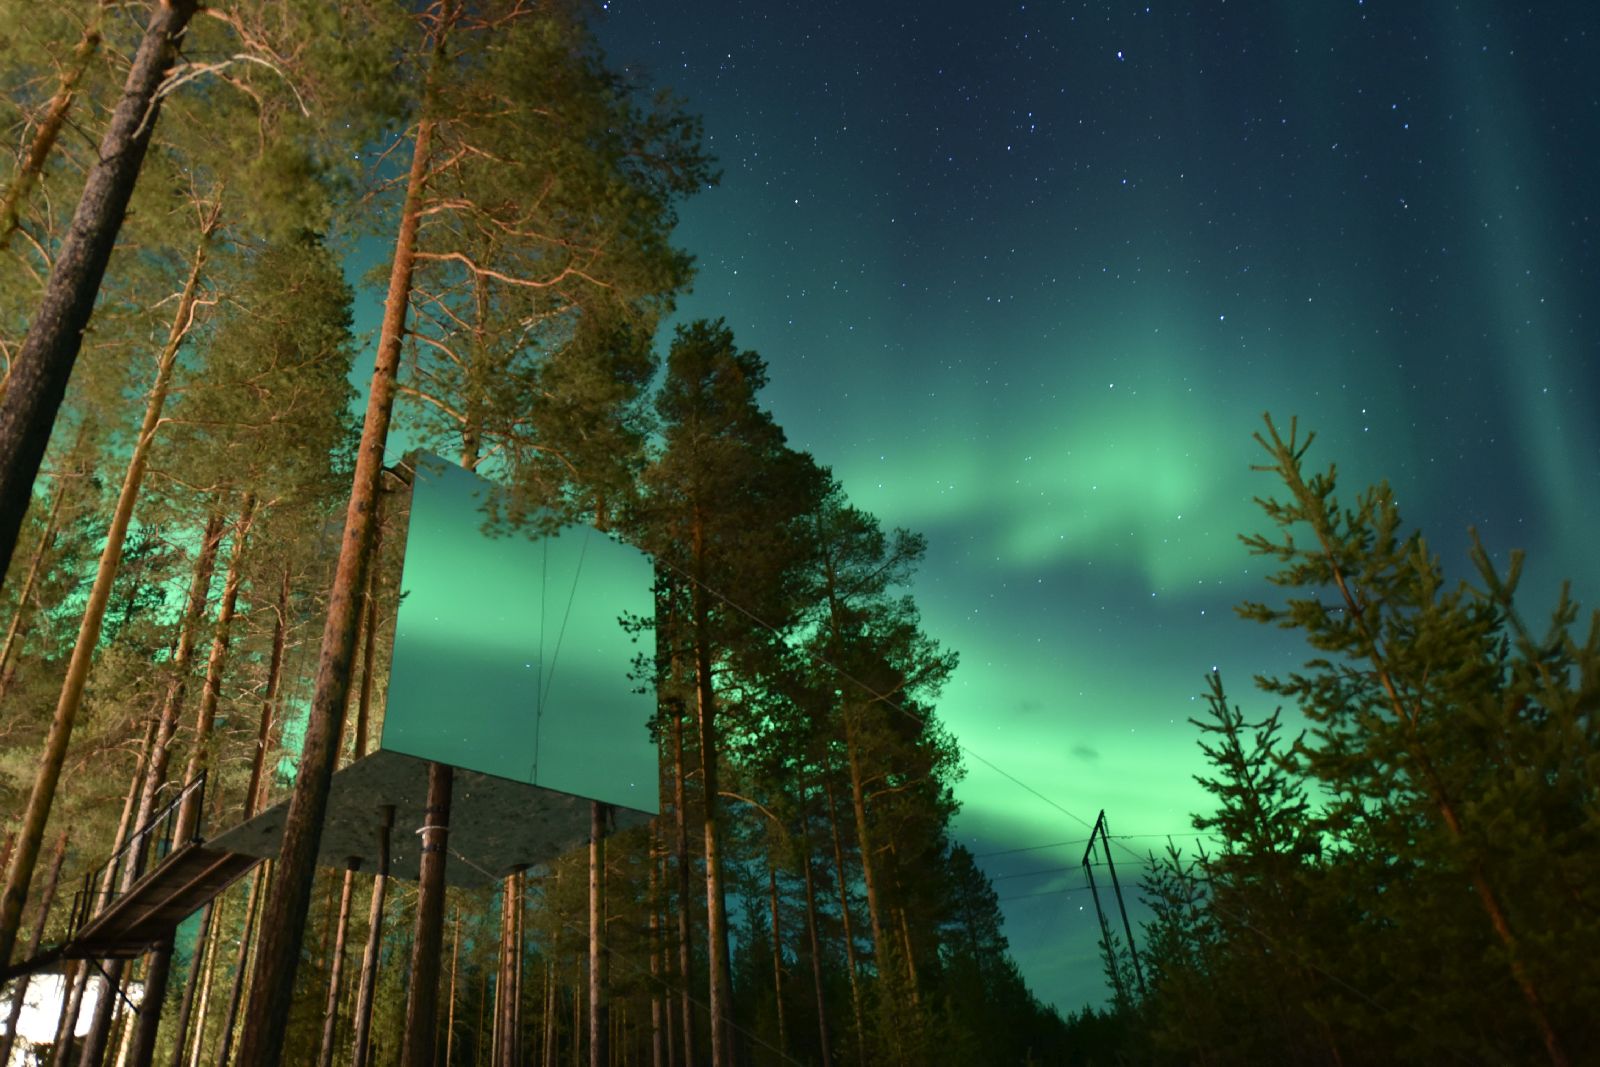 Mirror cube and Northern Lights at the Treehotel in Sweden